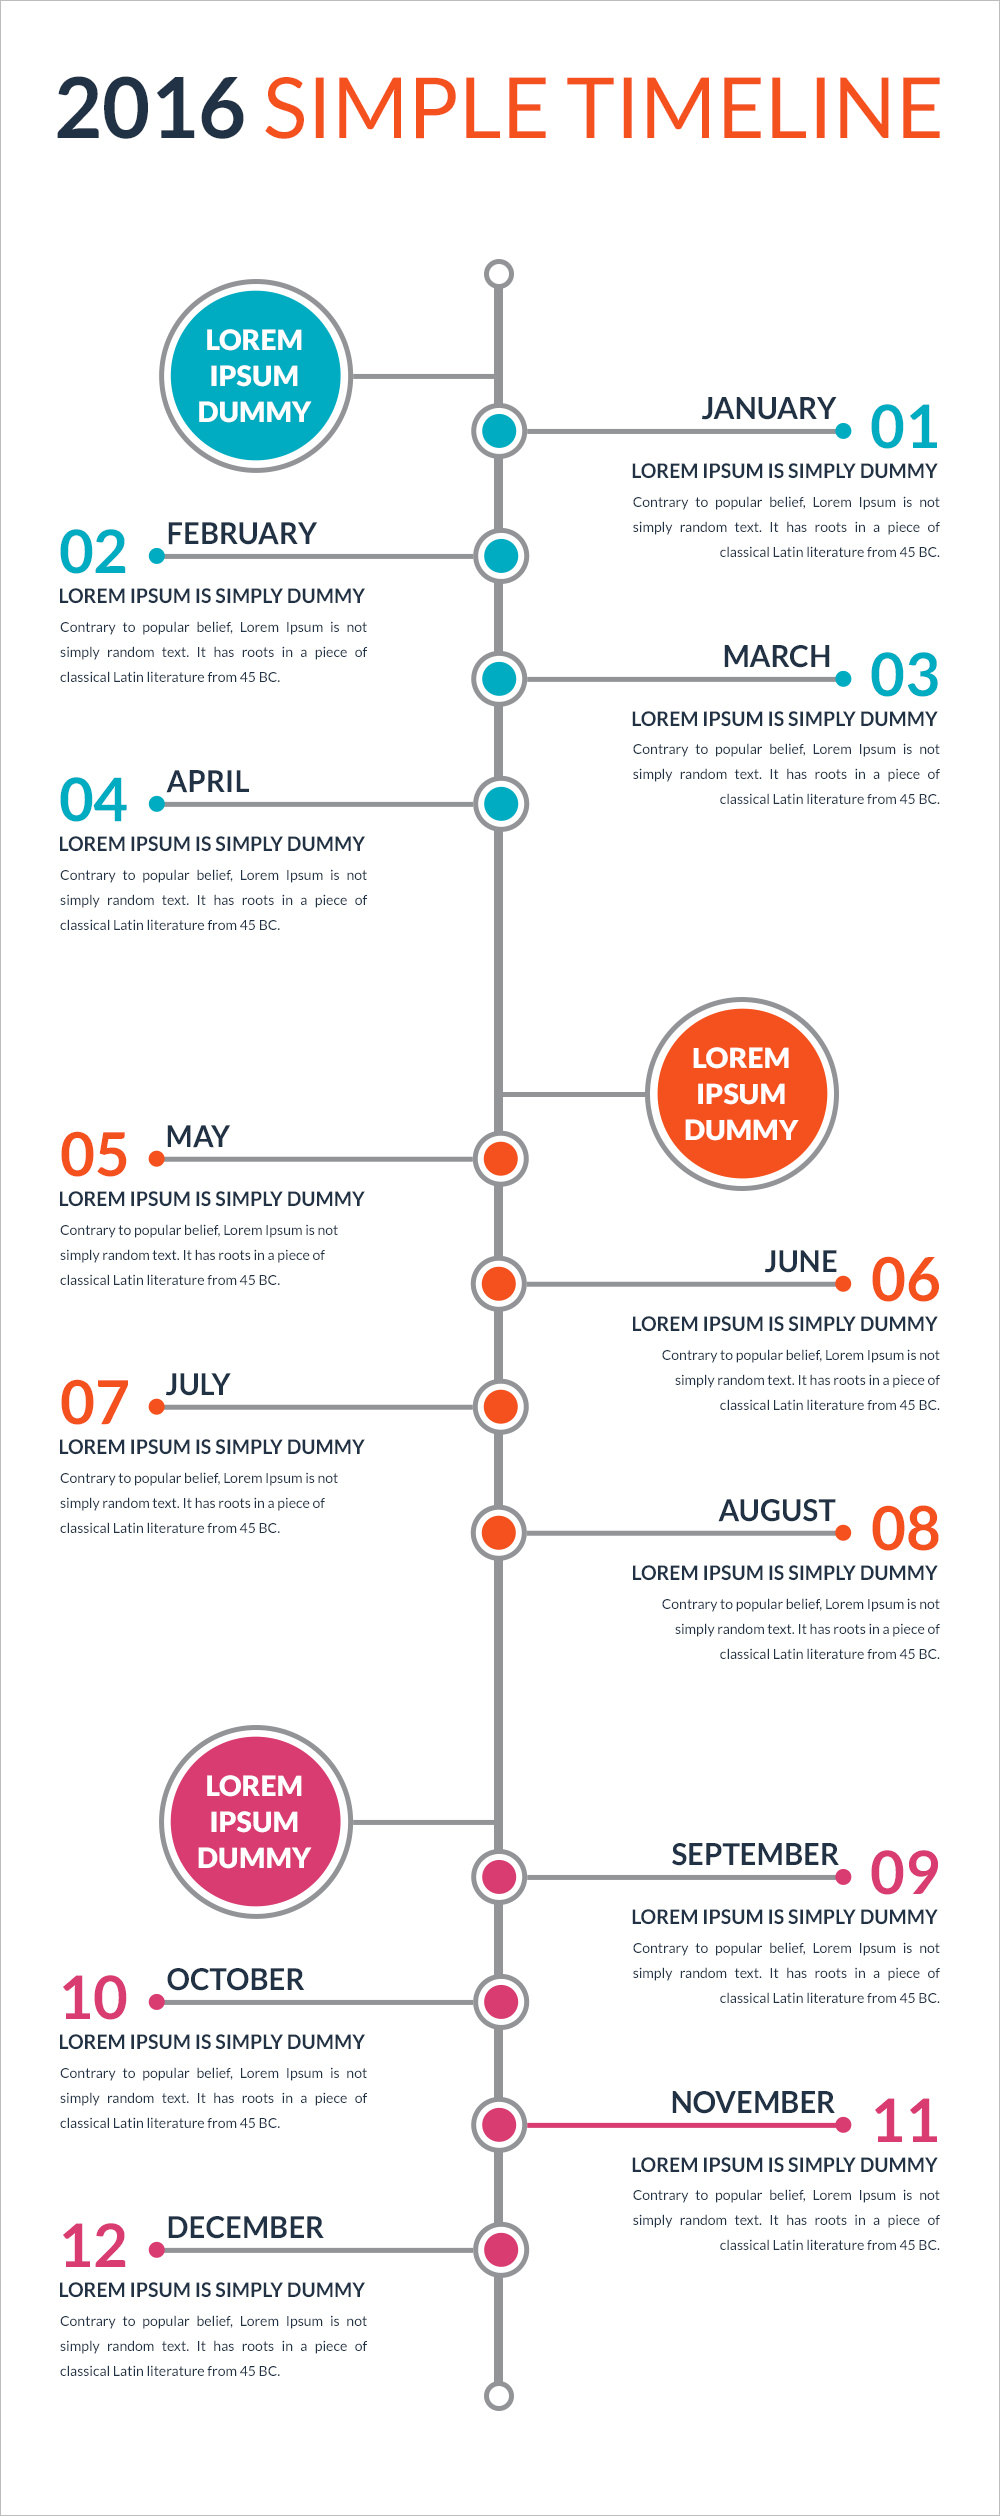 FREE 4 Timeline Template Designs In PSD